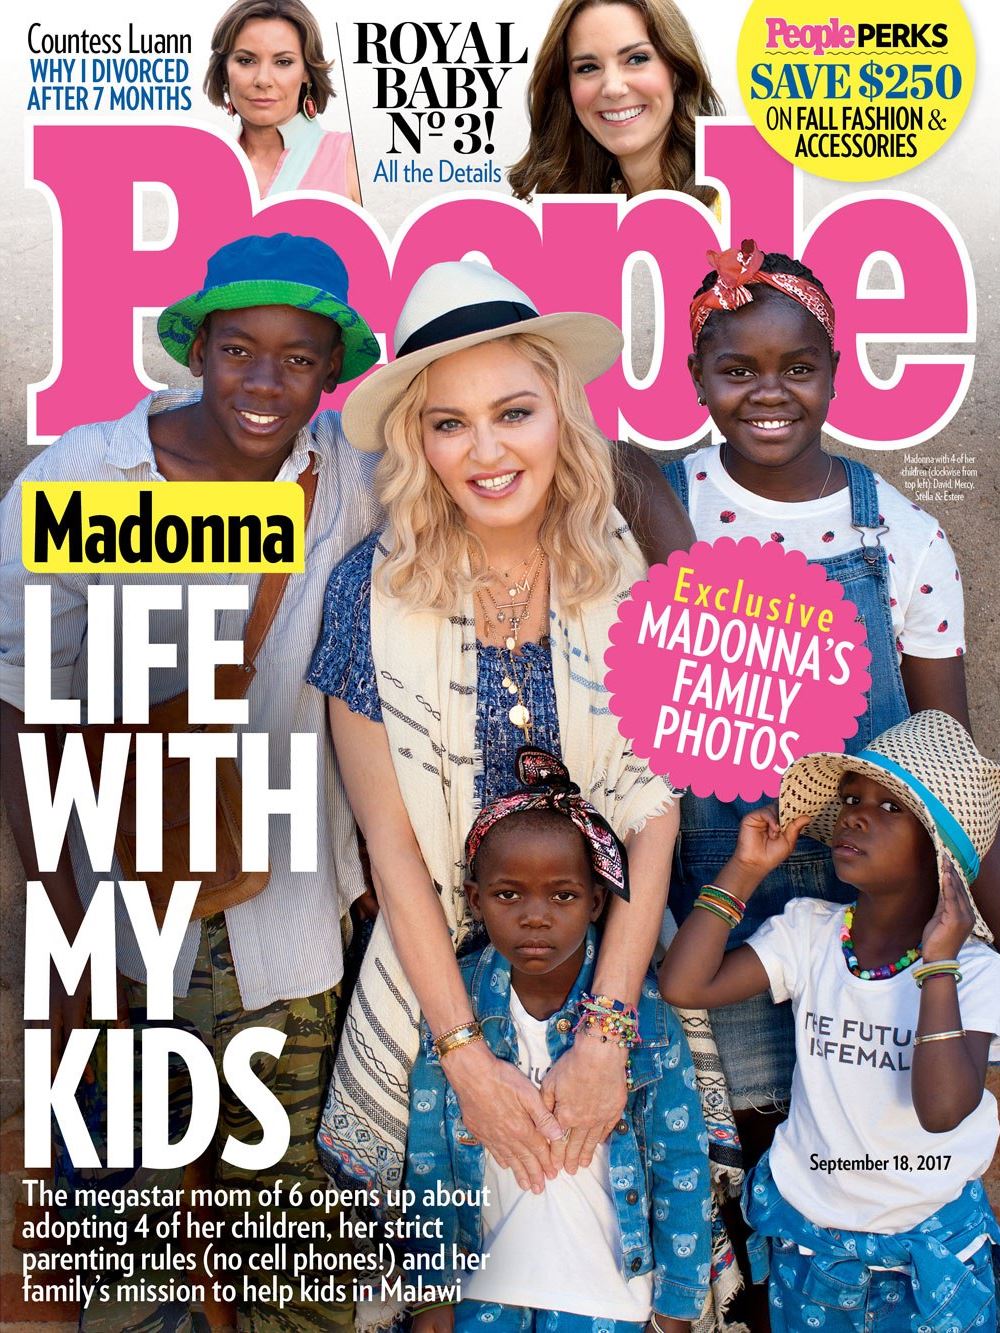 Madonna on the cover of People